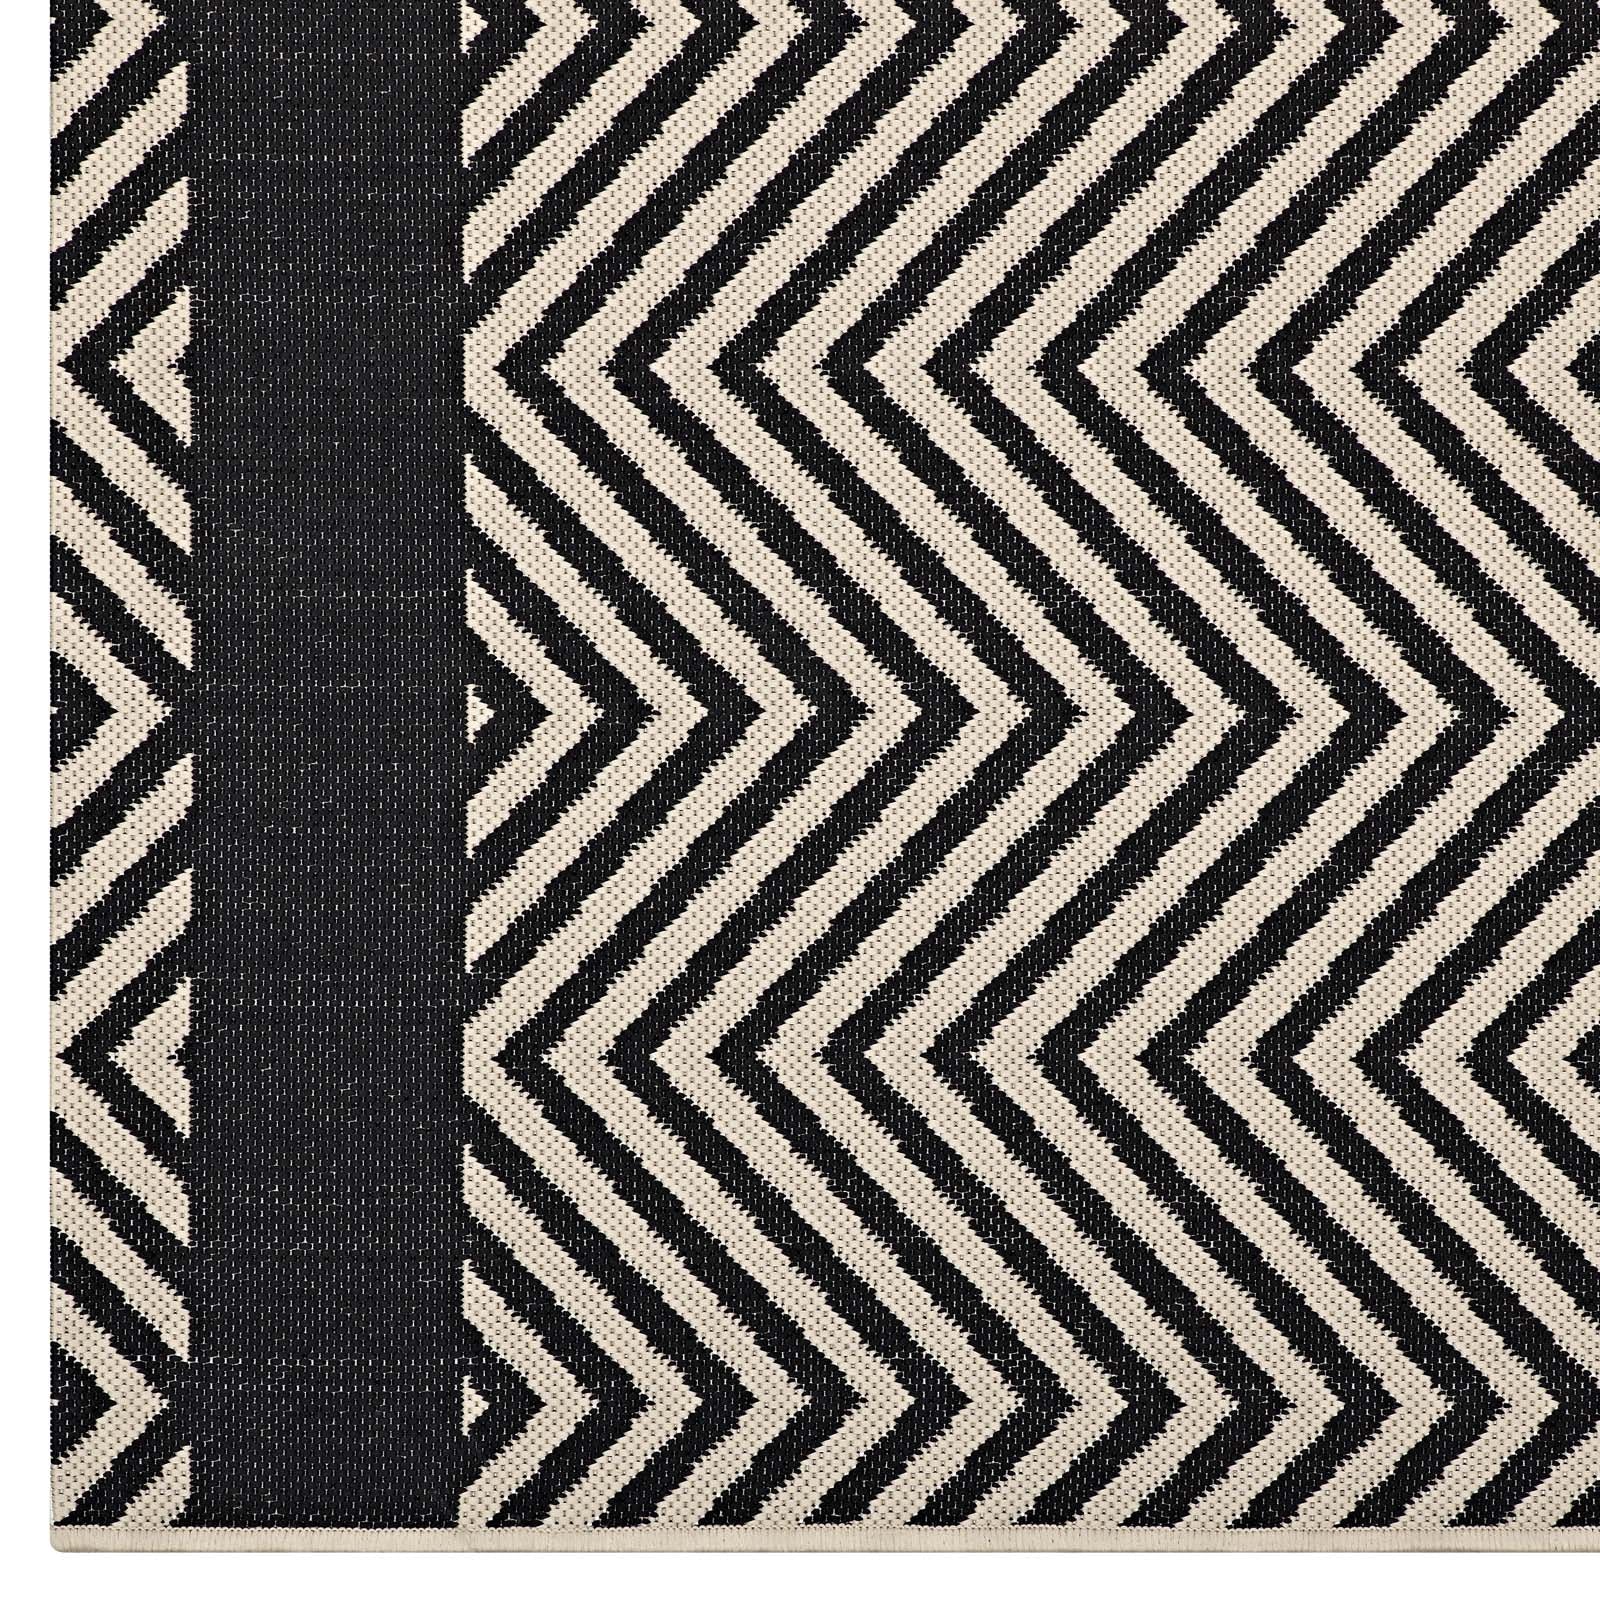 Optica Chevron With End Borders Indoor and Outdoor Area Rug - East Shore Modern Home Furnishings